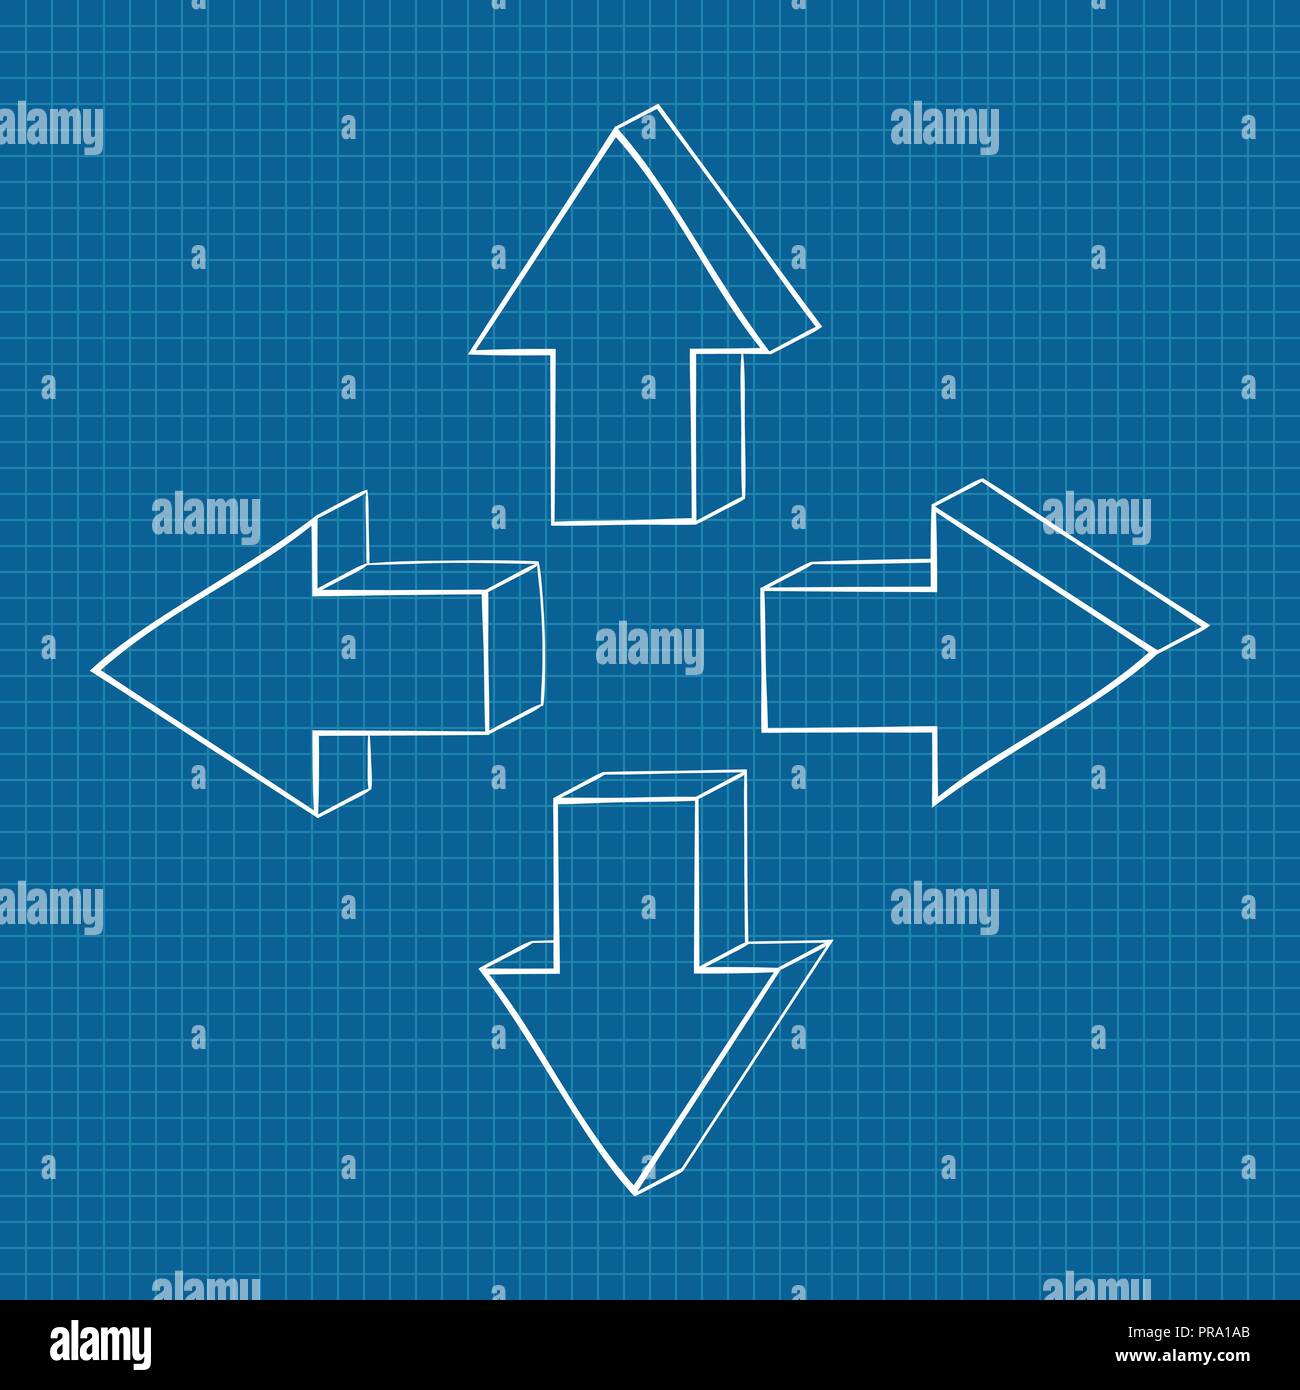 Arrows. Four directions. On blueprint background Stock Vector